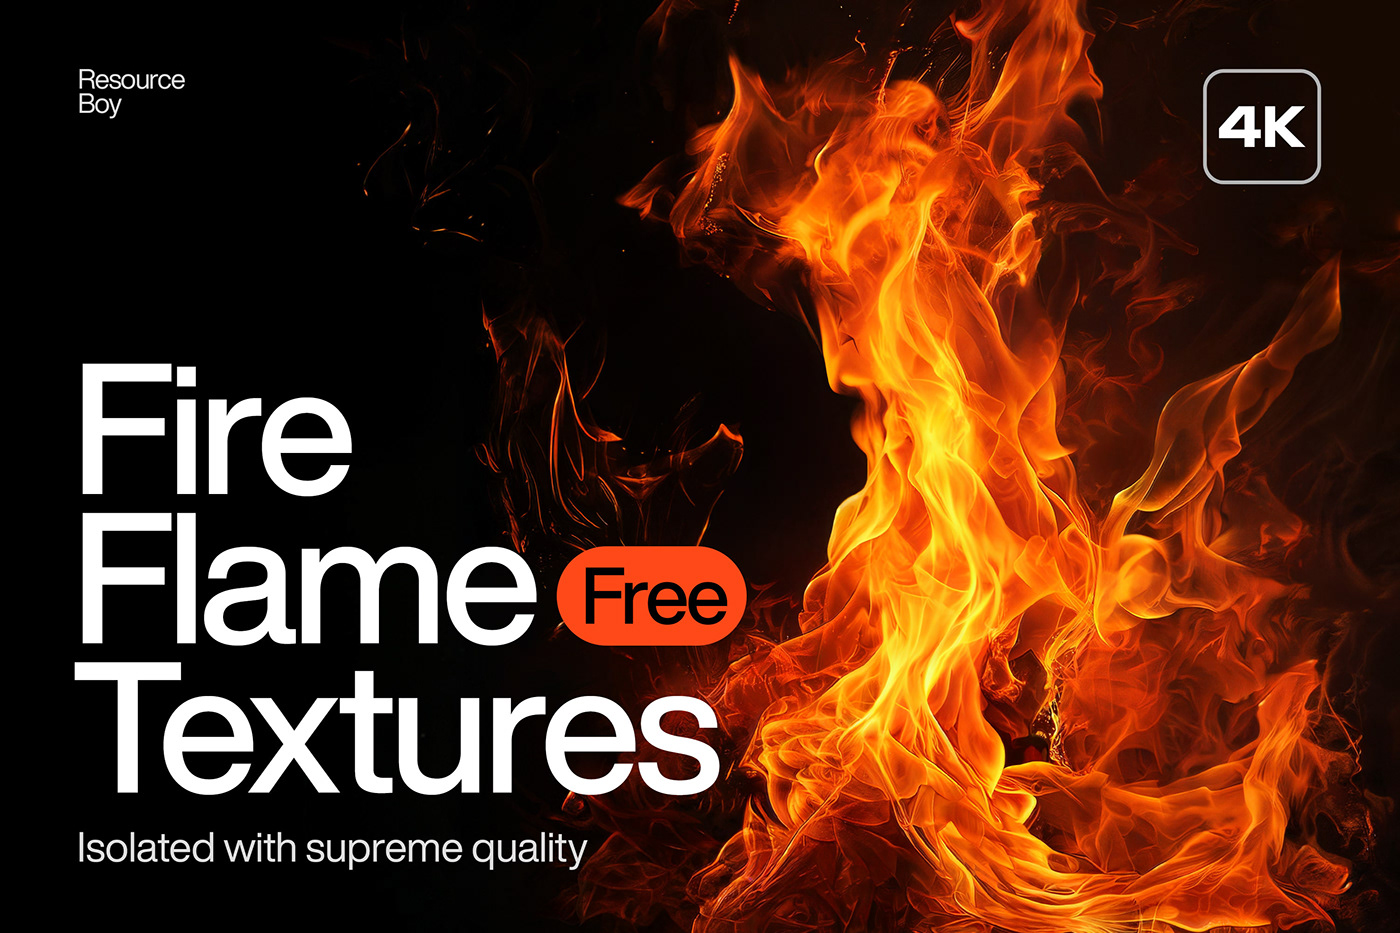 free textures texture free background fire flame burn freebie Overlay texture pack